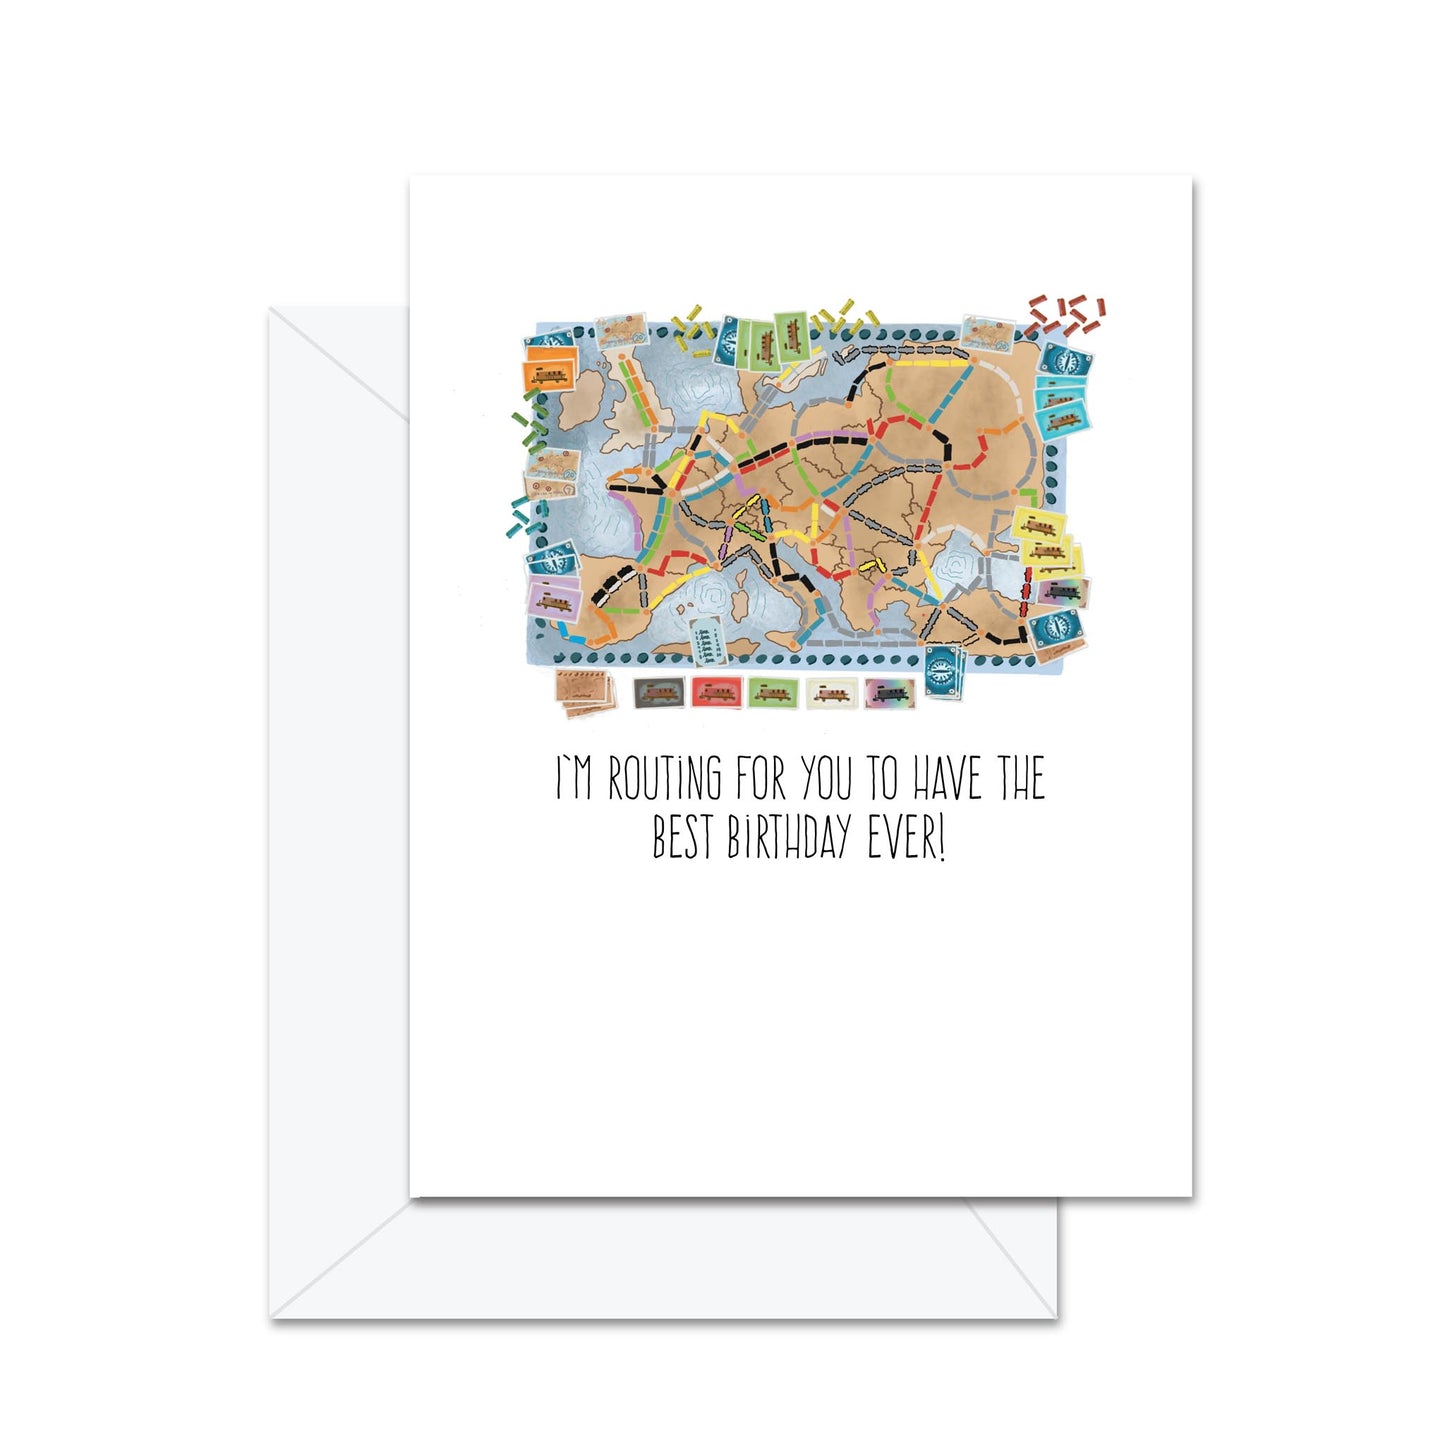 I'm Routing For You To Have The Best Birthday Ever! - Greeting Card